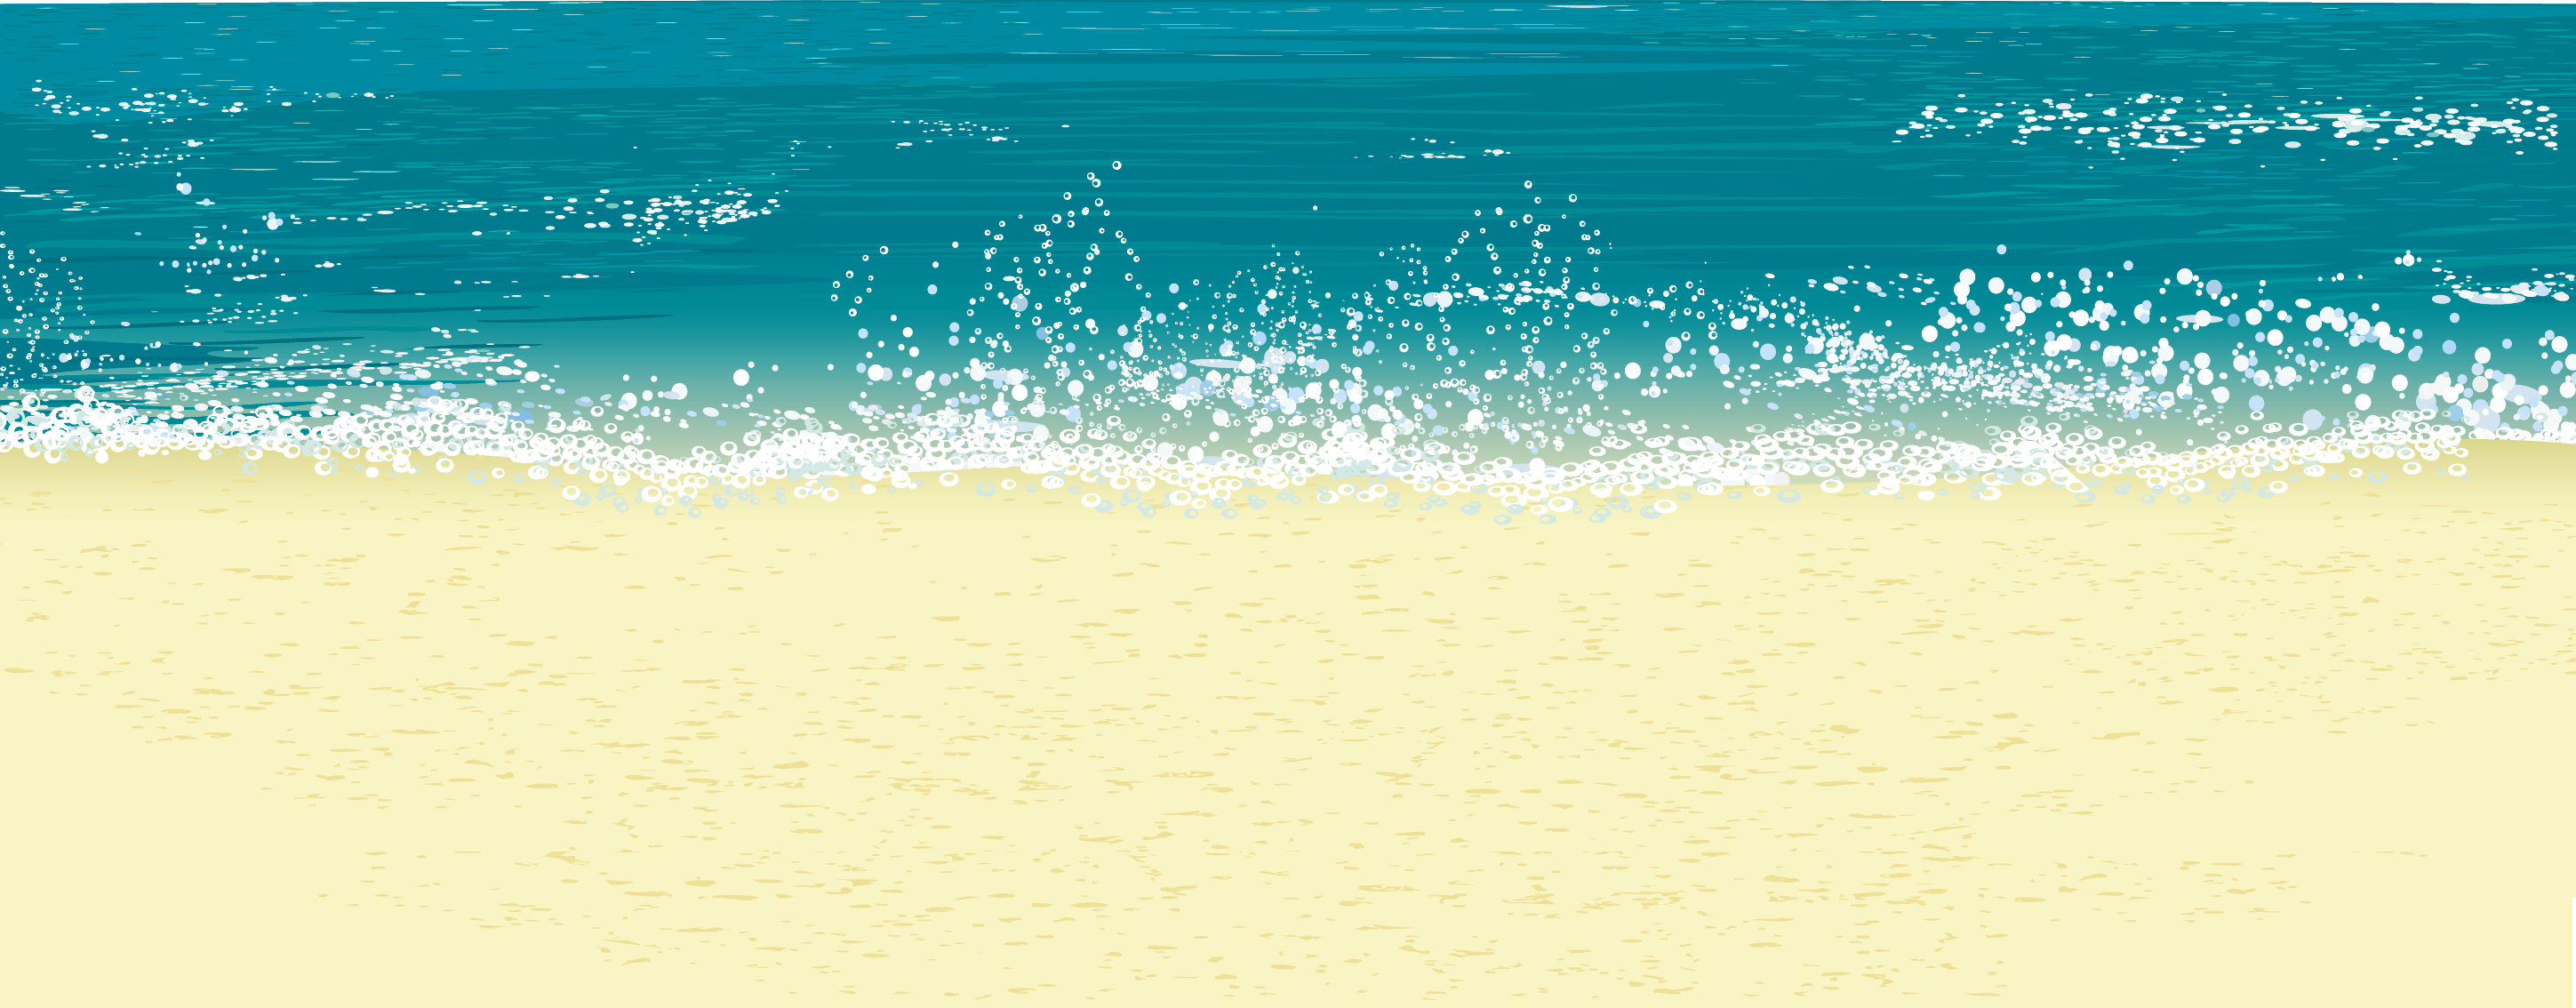 free clipart images of the beach - photo #15